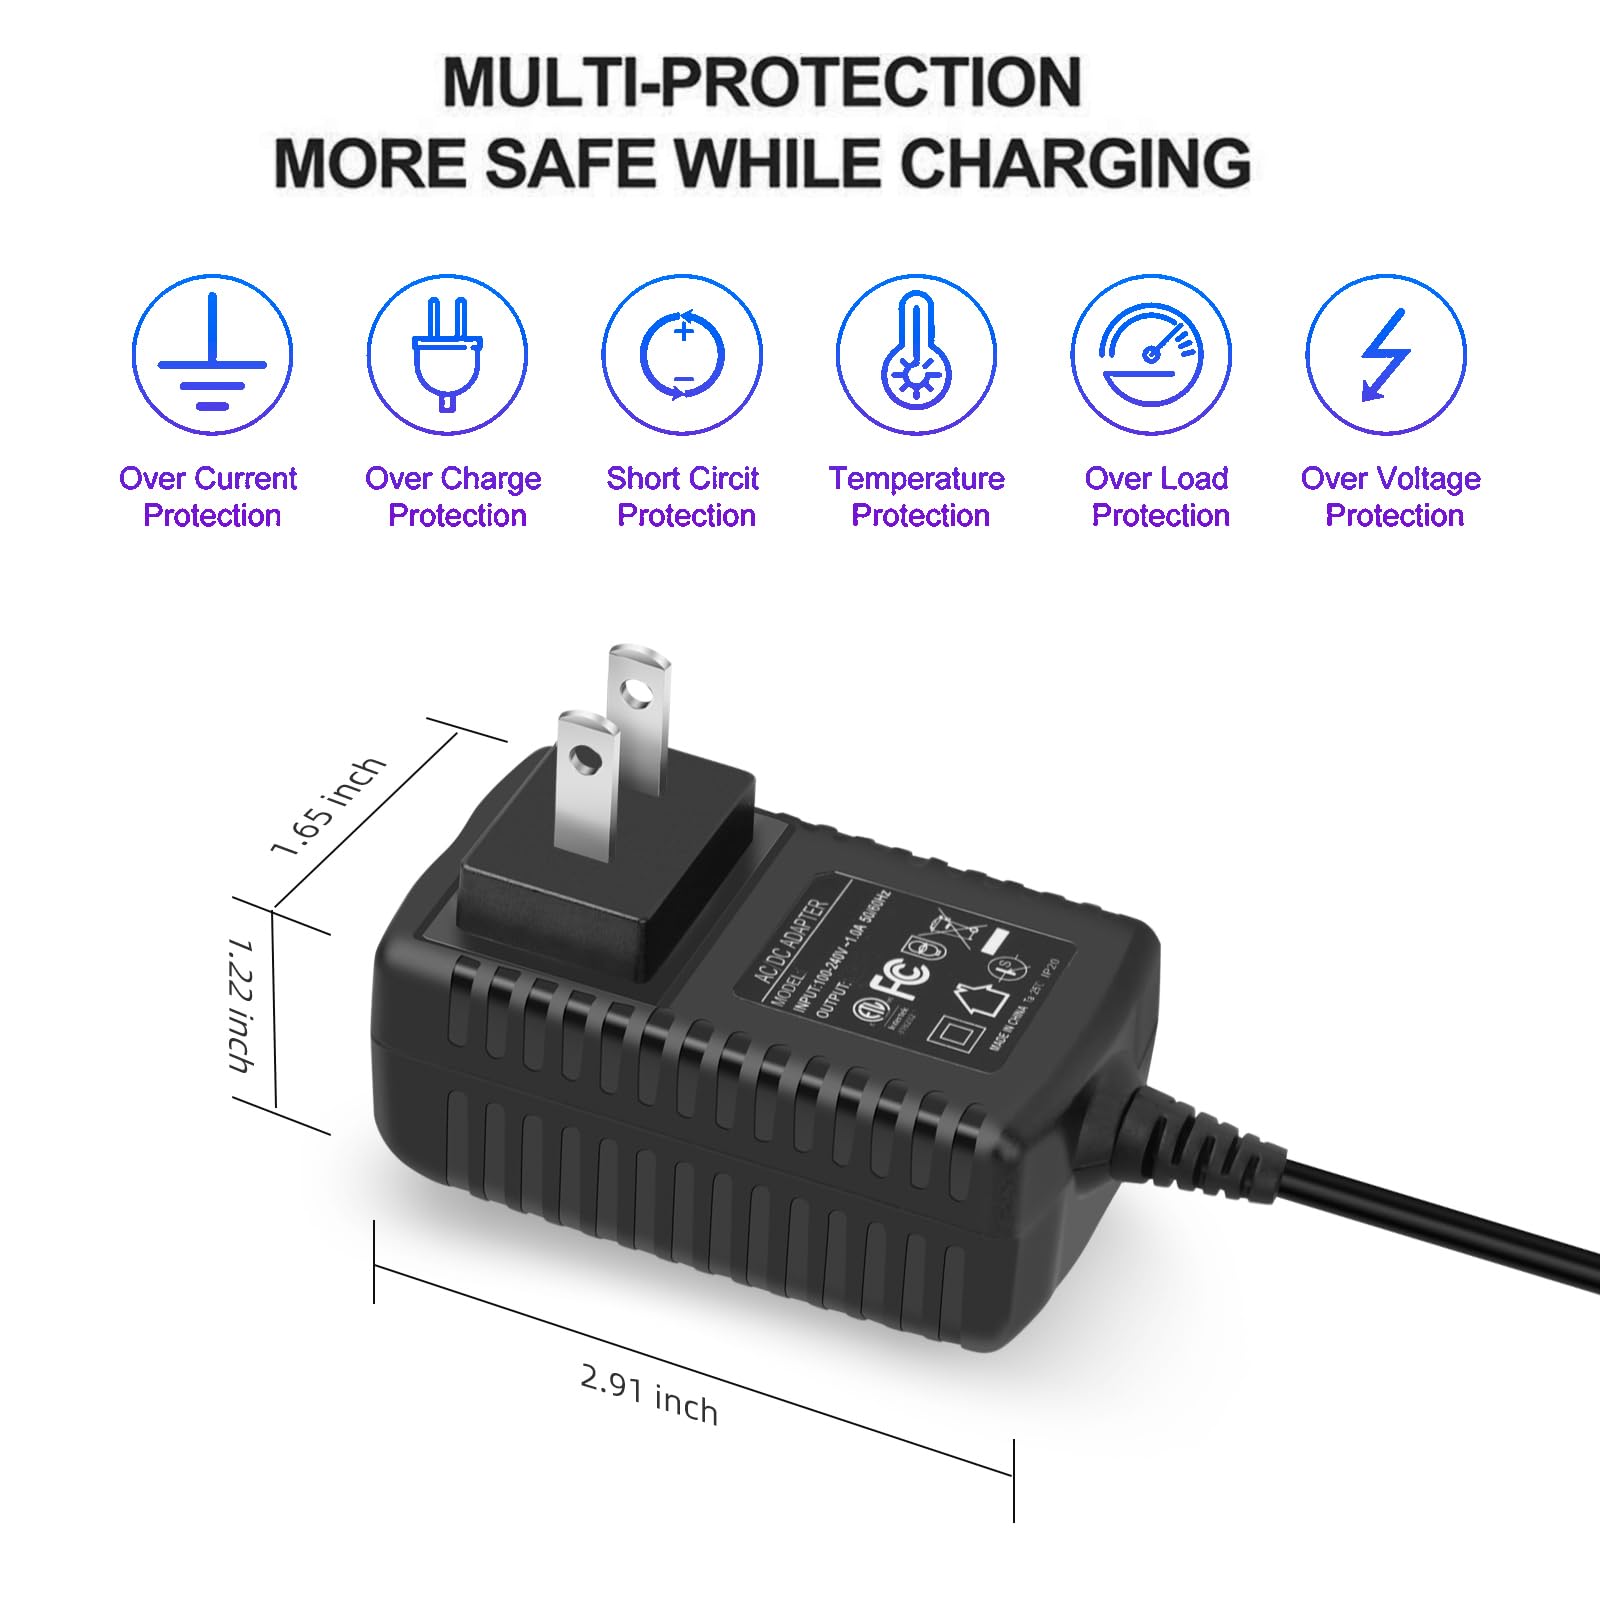 12.6V 1.8A Charger for Aiper Robotic Pool Cleaner Compatible with Aiper Seagull SE 600 HJ1103J HJ1102 600 1000 1500 AIPURY1500 P1111 Robotic Pool Cleaner Charger Power Cord